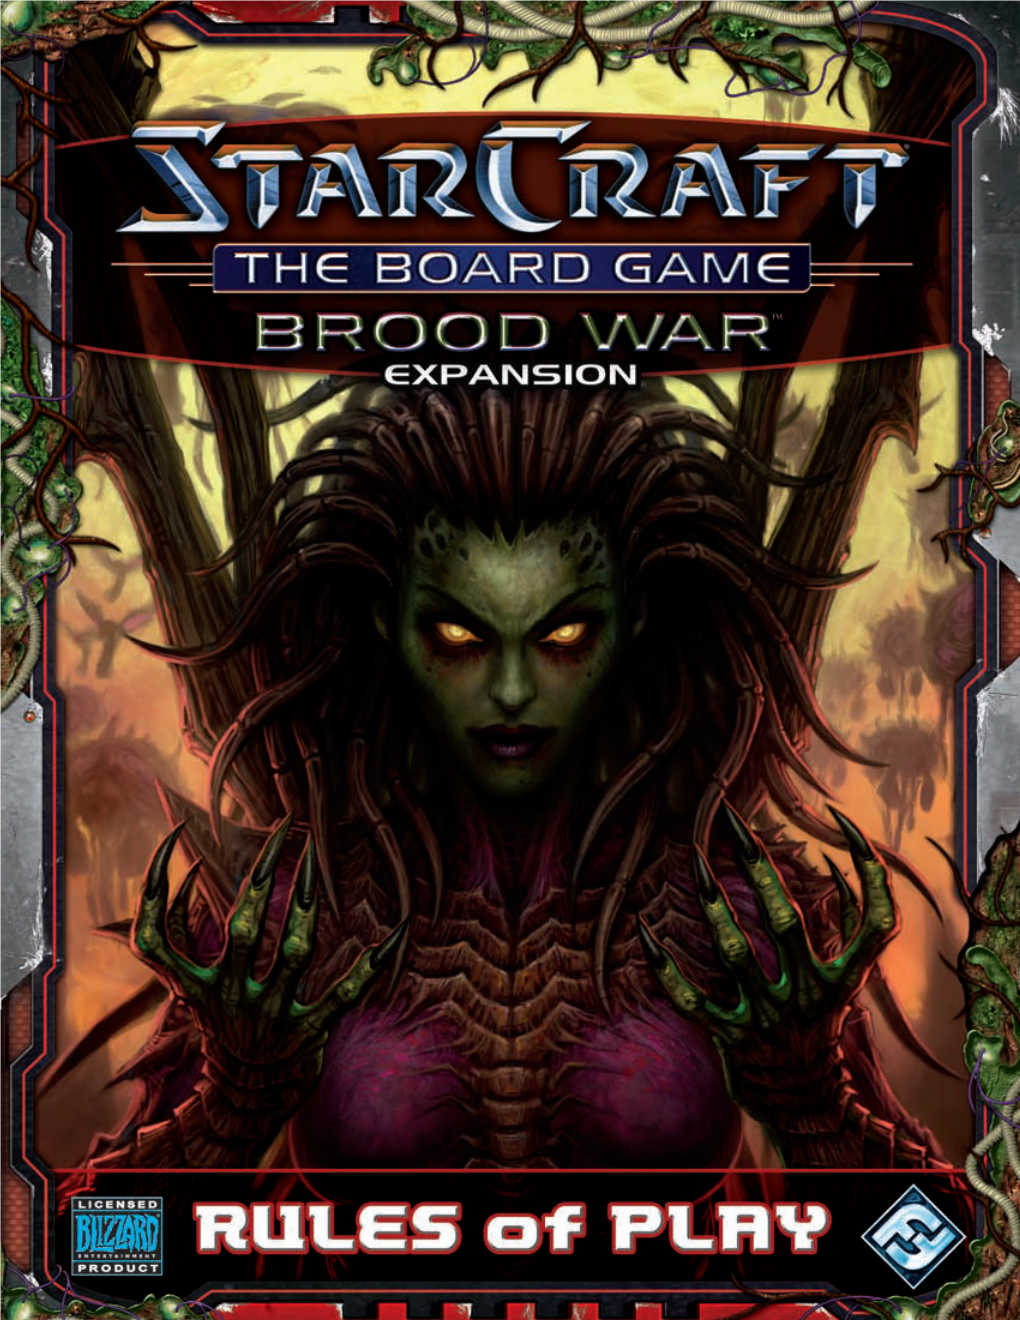 Starcraft: the Following Sections Briefly Describe and Identify the the Board Game